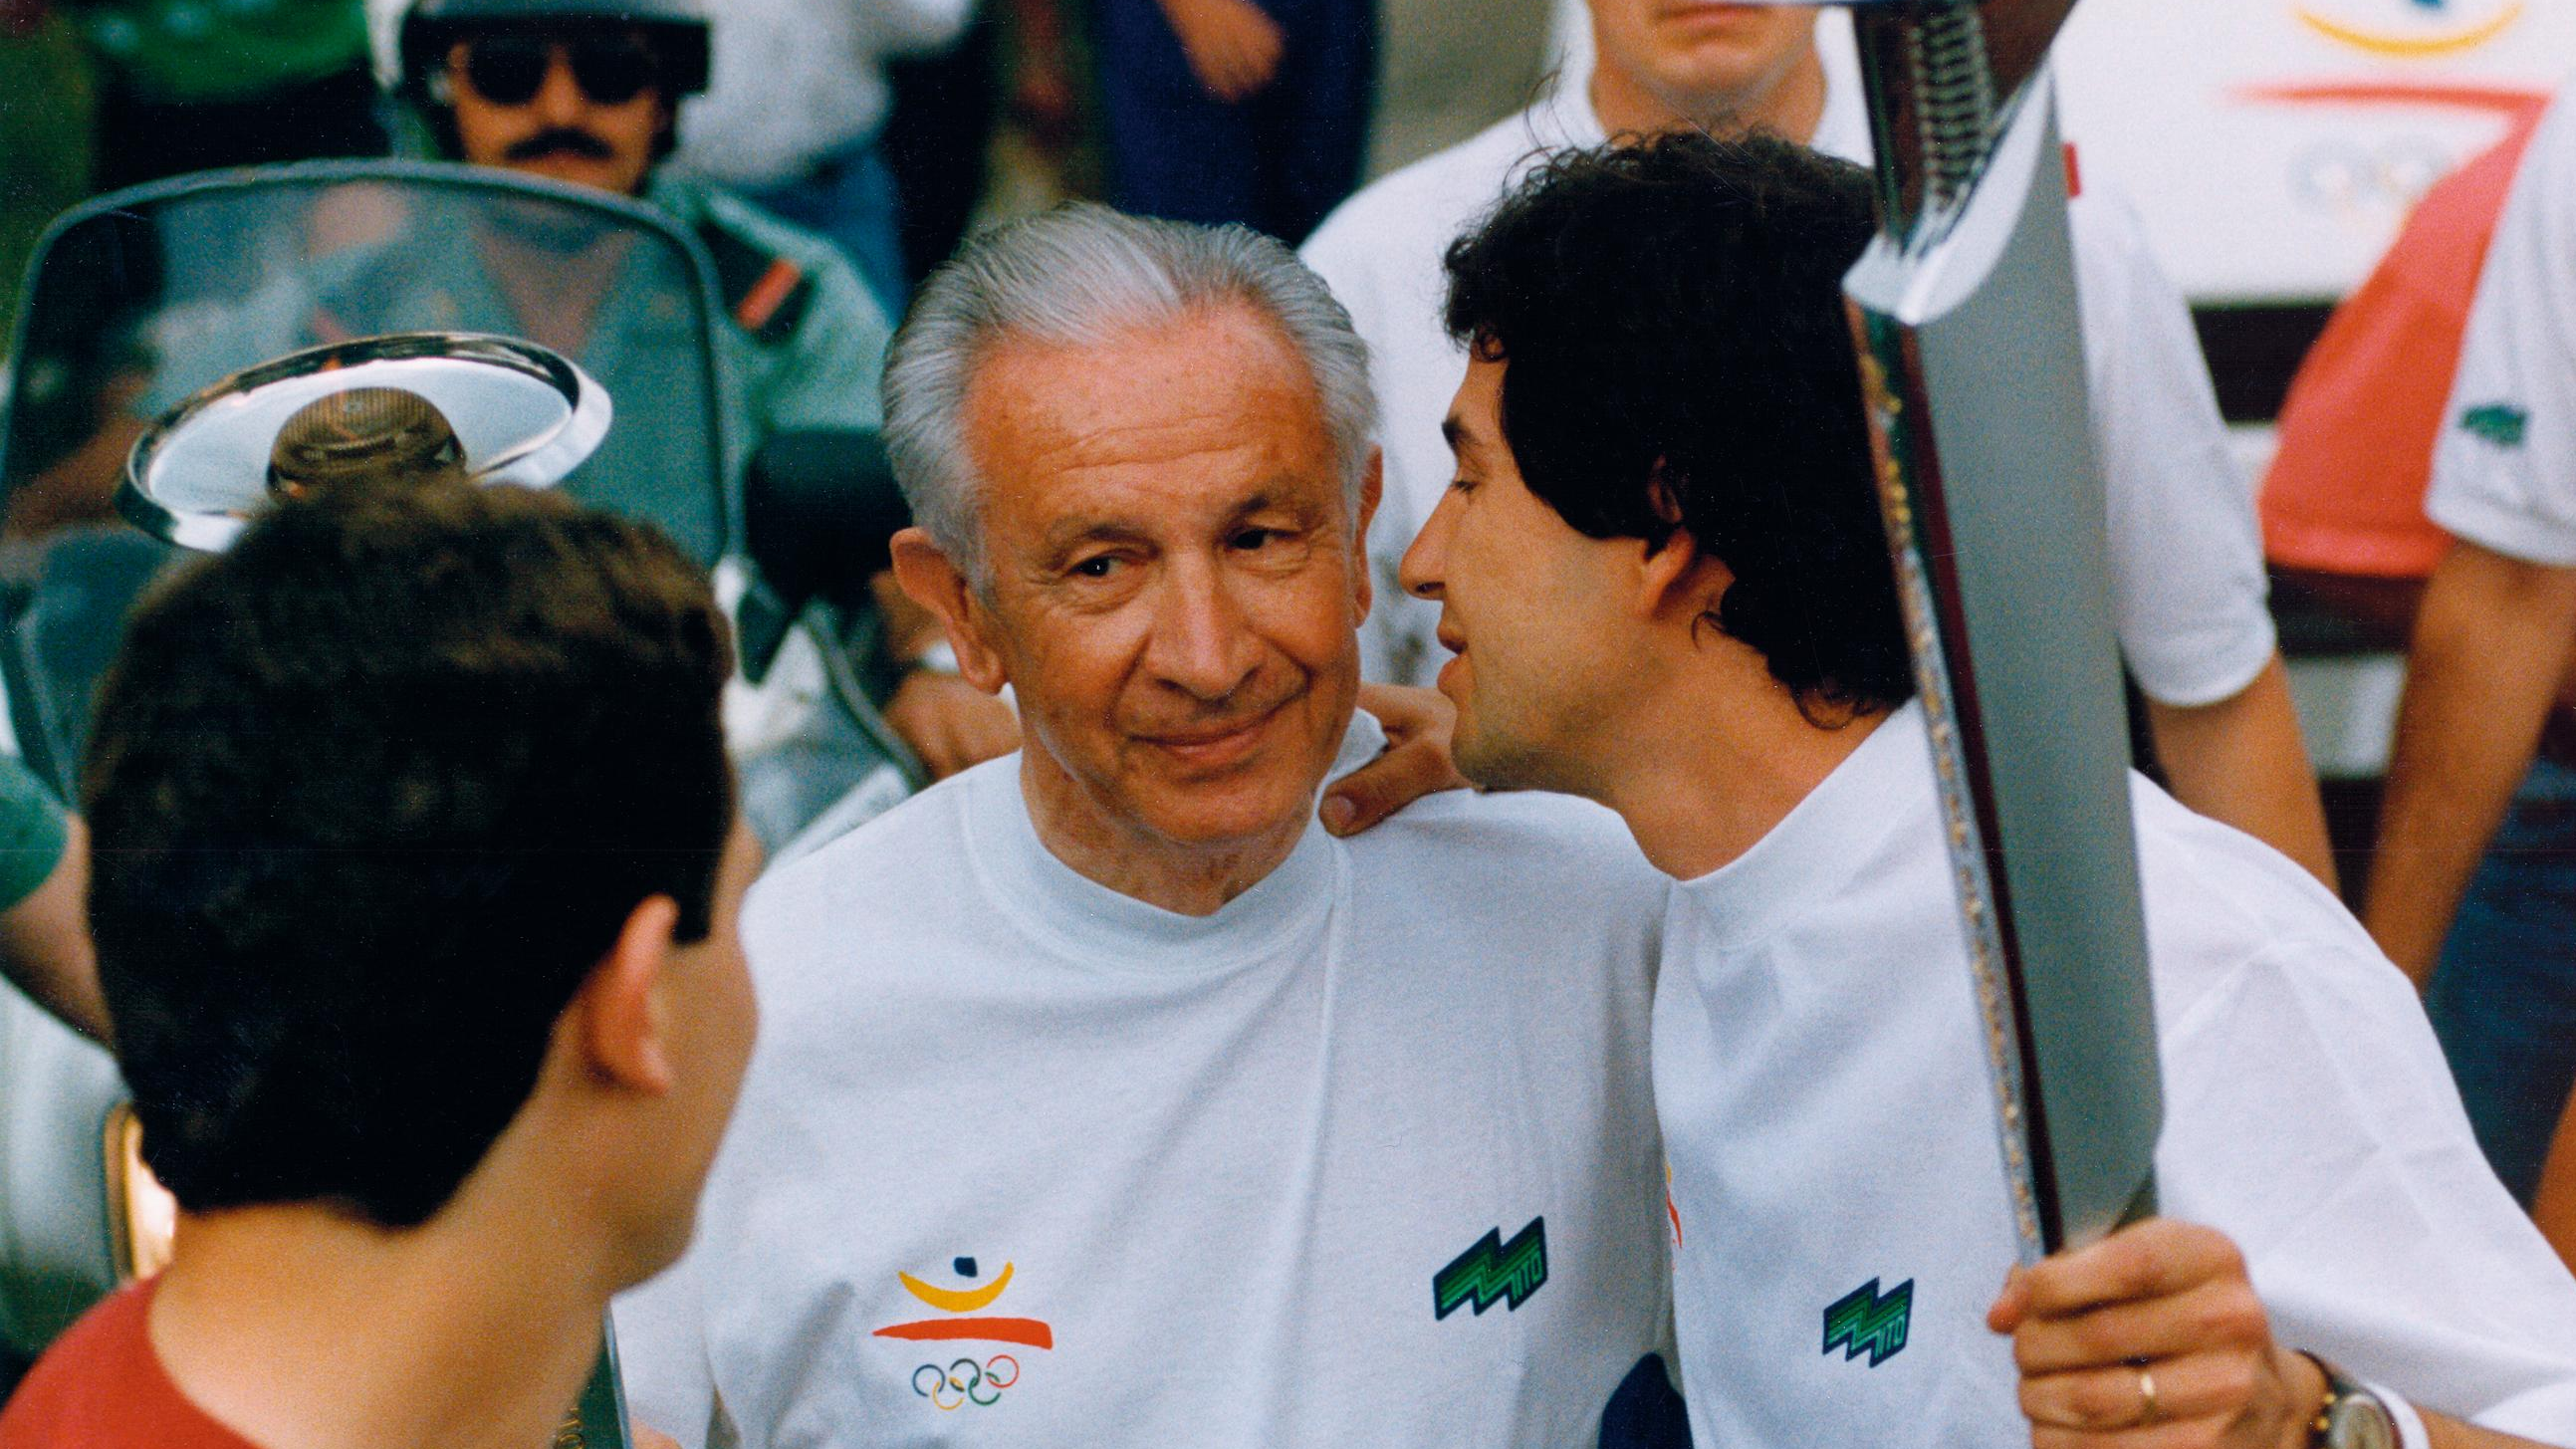 Juan Antonio Samaranch with his late father at the 1992 torch relay in Barcelona, Spain. /Samaranch Foundation
